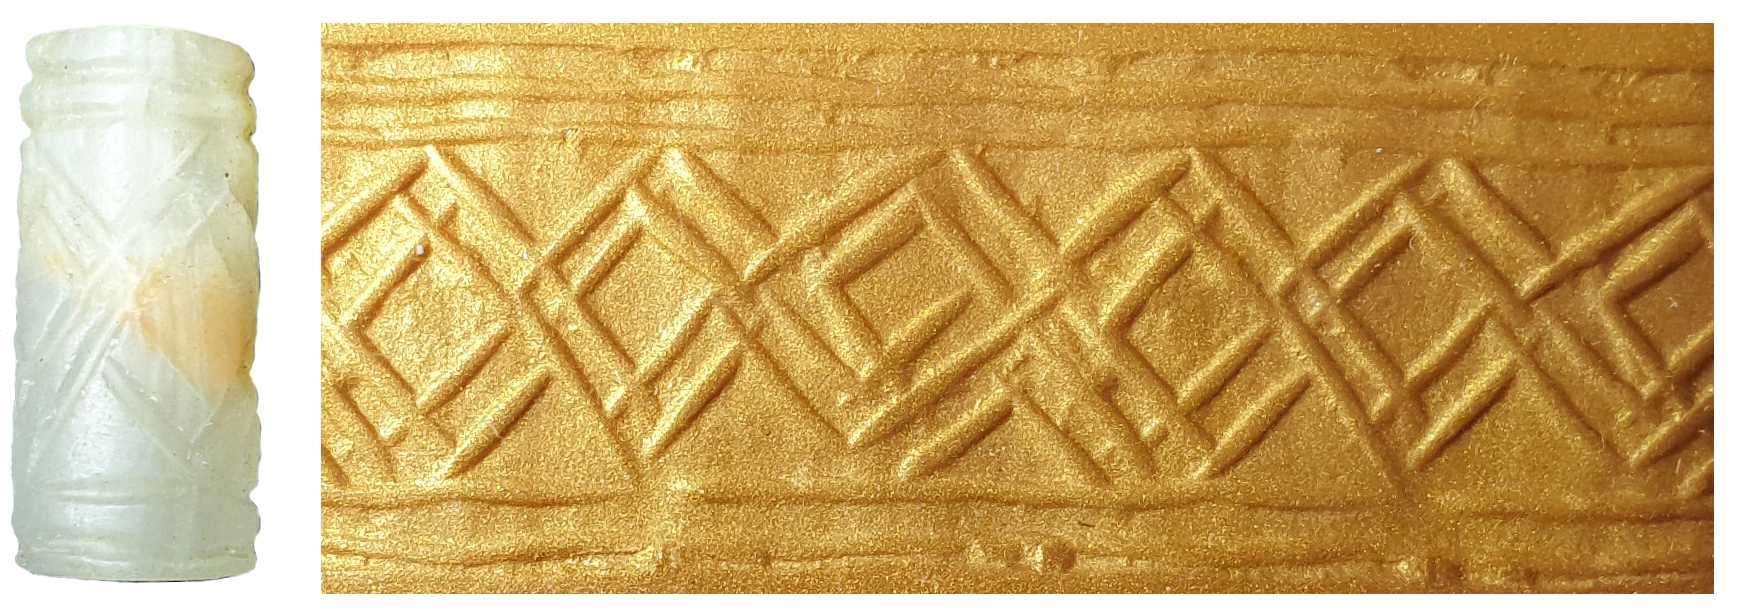  Cylinder seal, carved translucent chalcedony, Mesopotamia, circa 3000 BCE. 24mm 4.46 grams. 